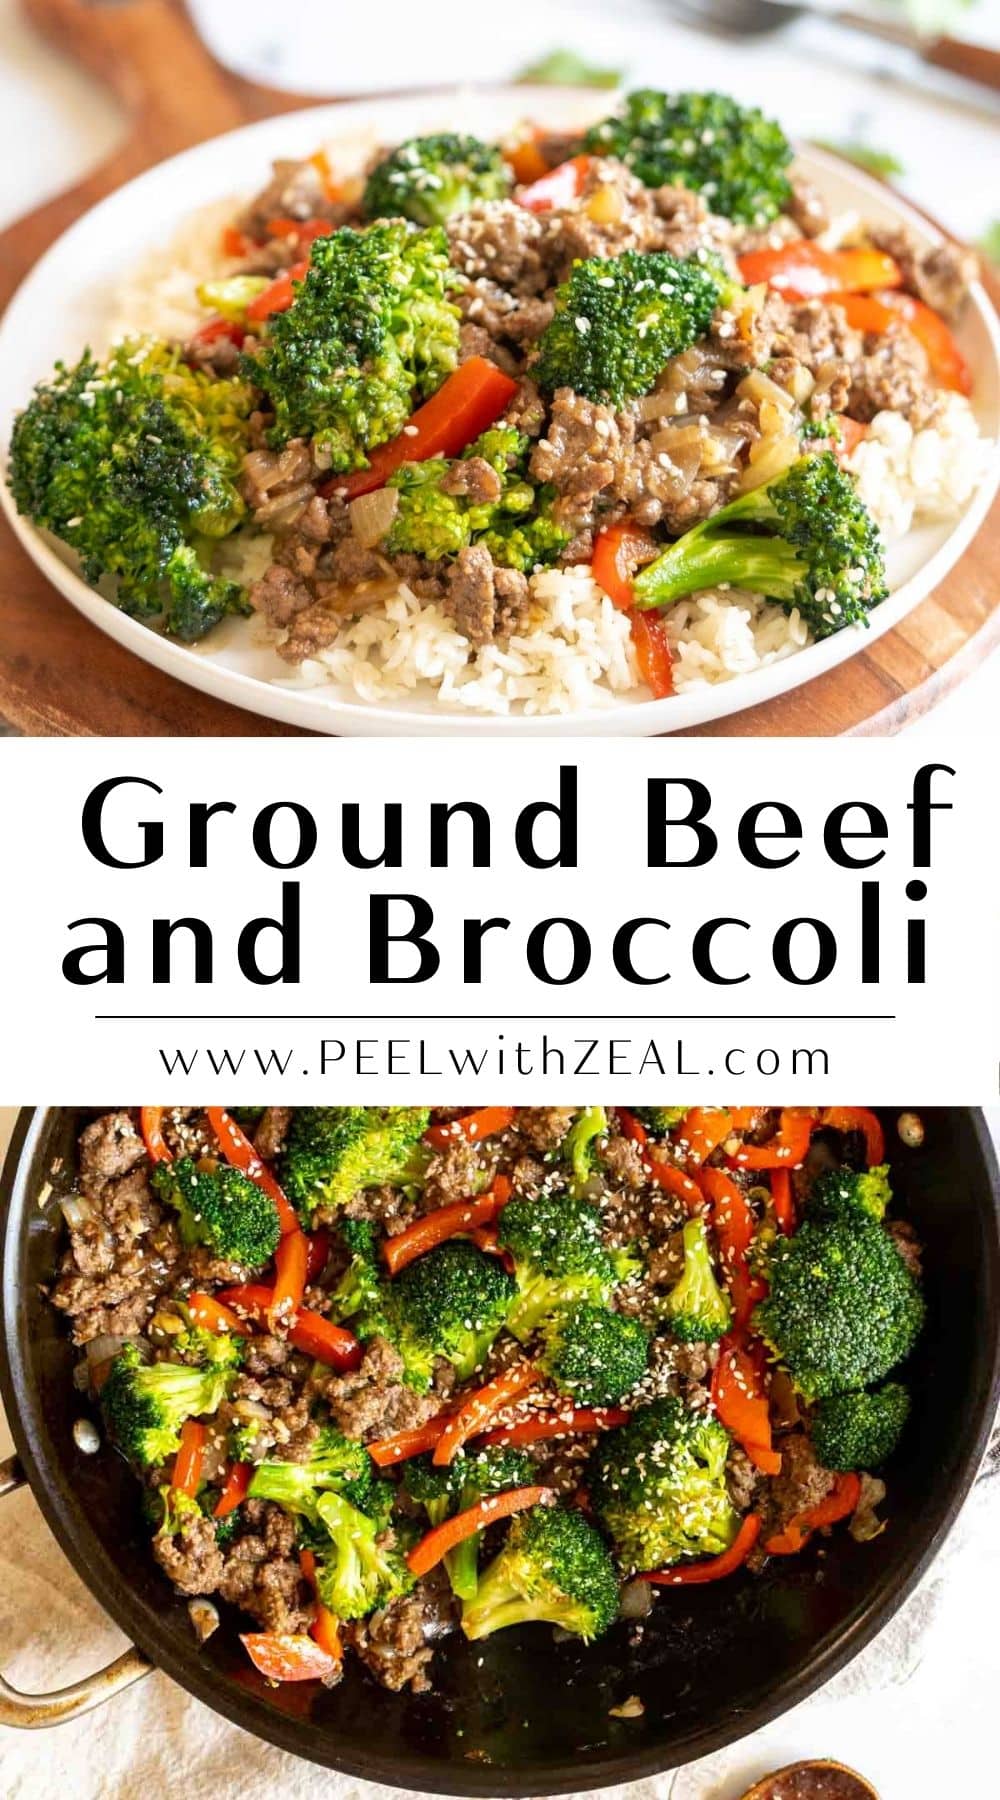 The Best Ground Beef and Broccoli Stir Fry Recipe